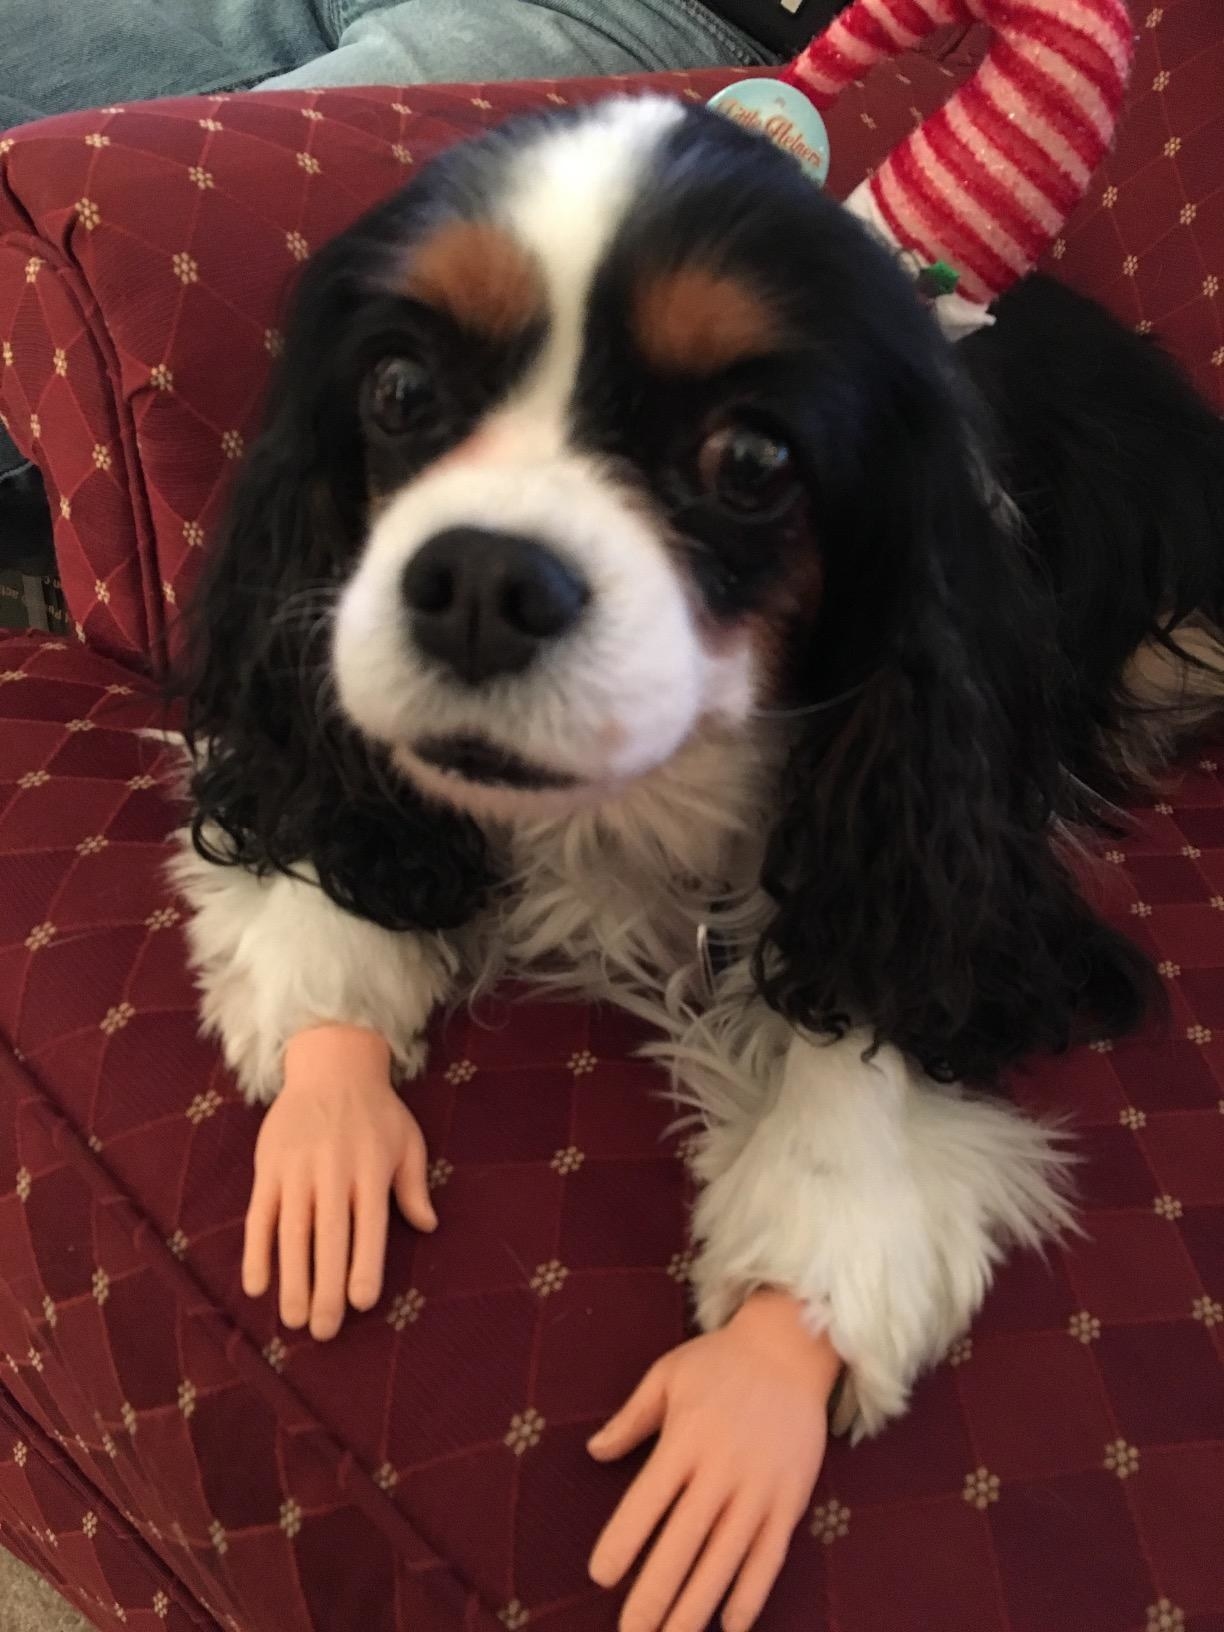 dog with plastic hands on paws 